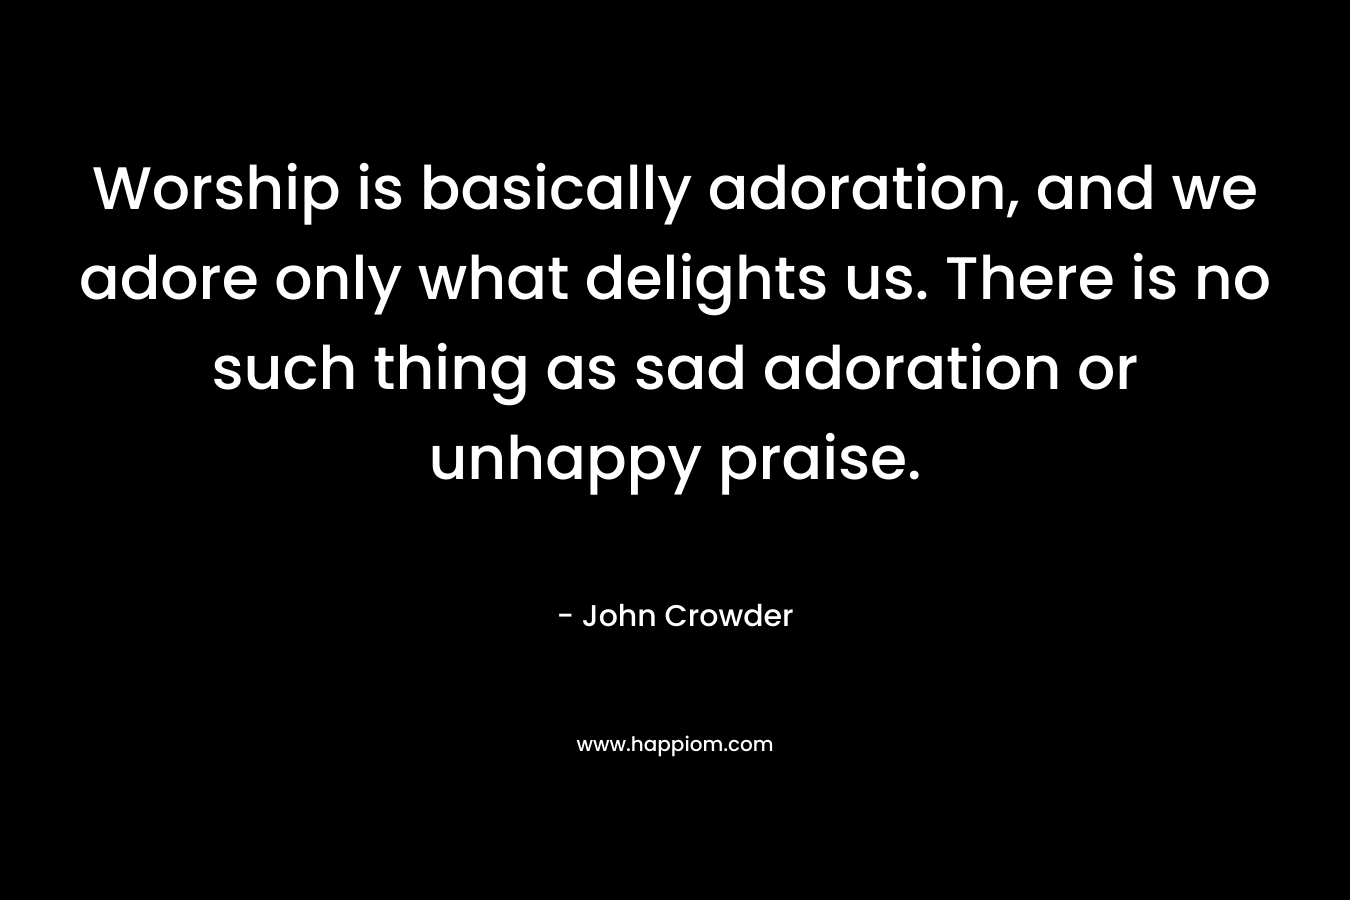 Worship is basically adoration, and we adore only what delights us. There is no such thing as sad adoration or unhappy praise. – John Crowder